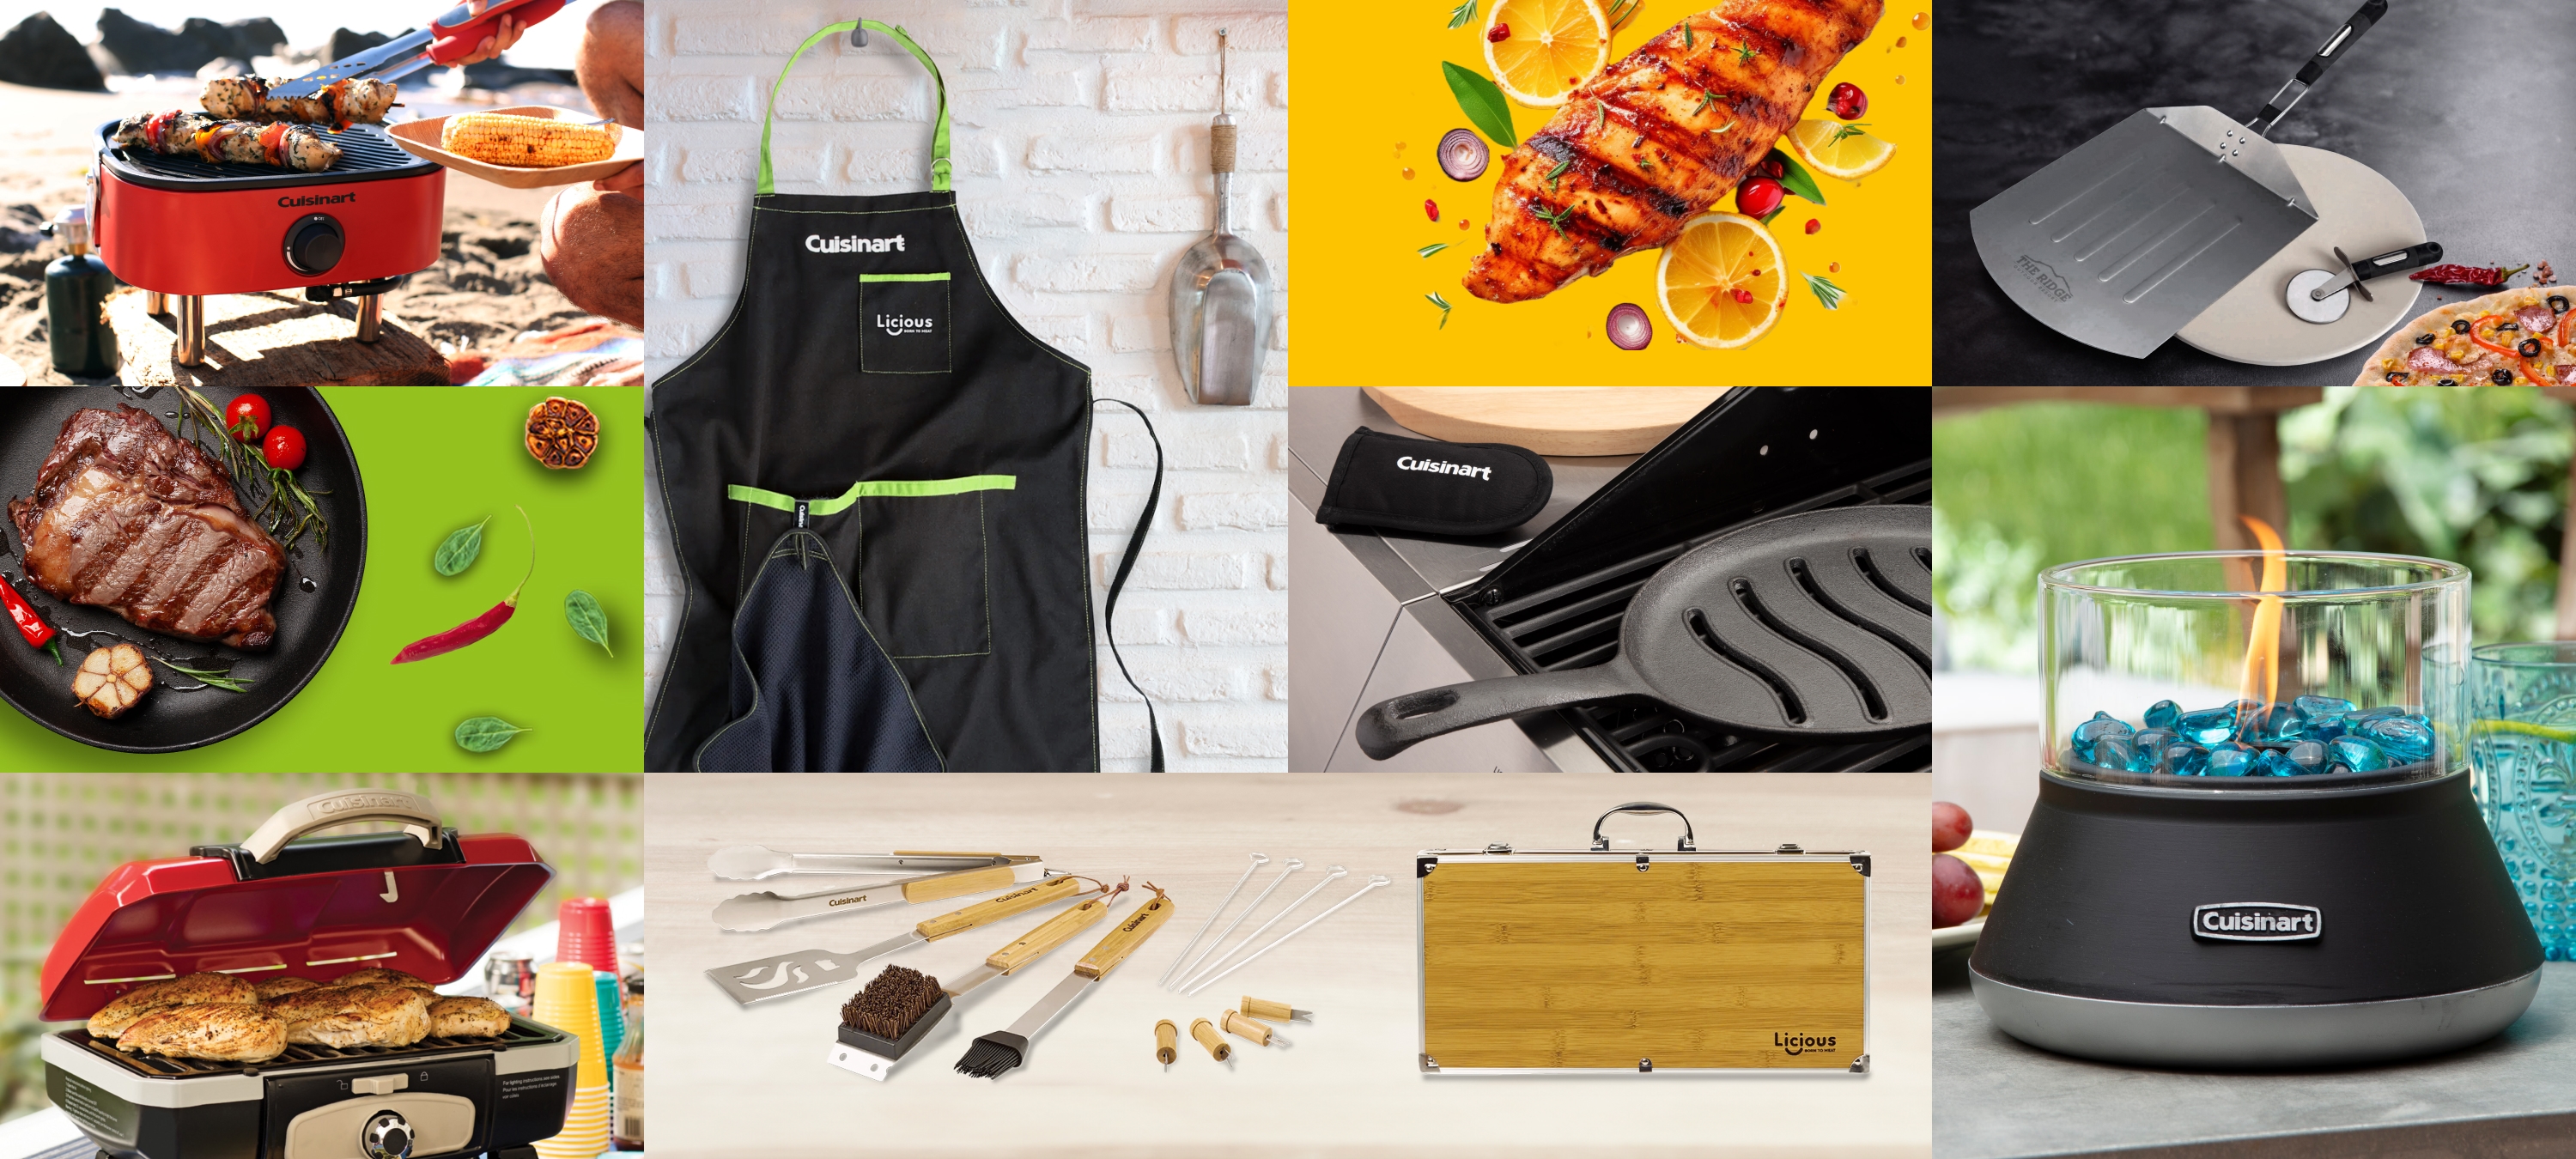 Elevate Their Outdoor Game with Cuisinart Grills, BBQ Tools & Accessories